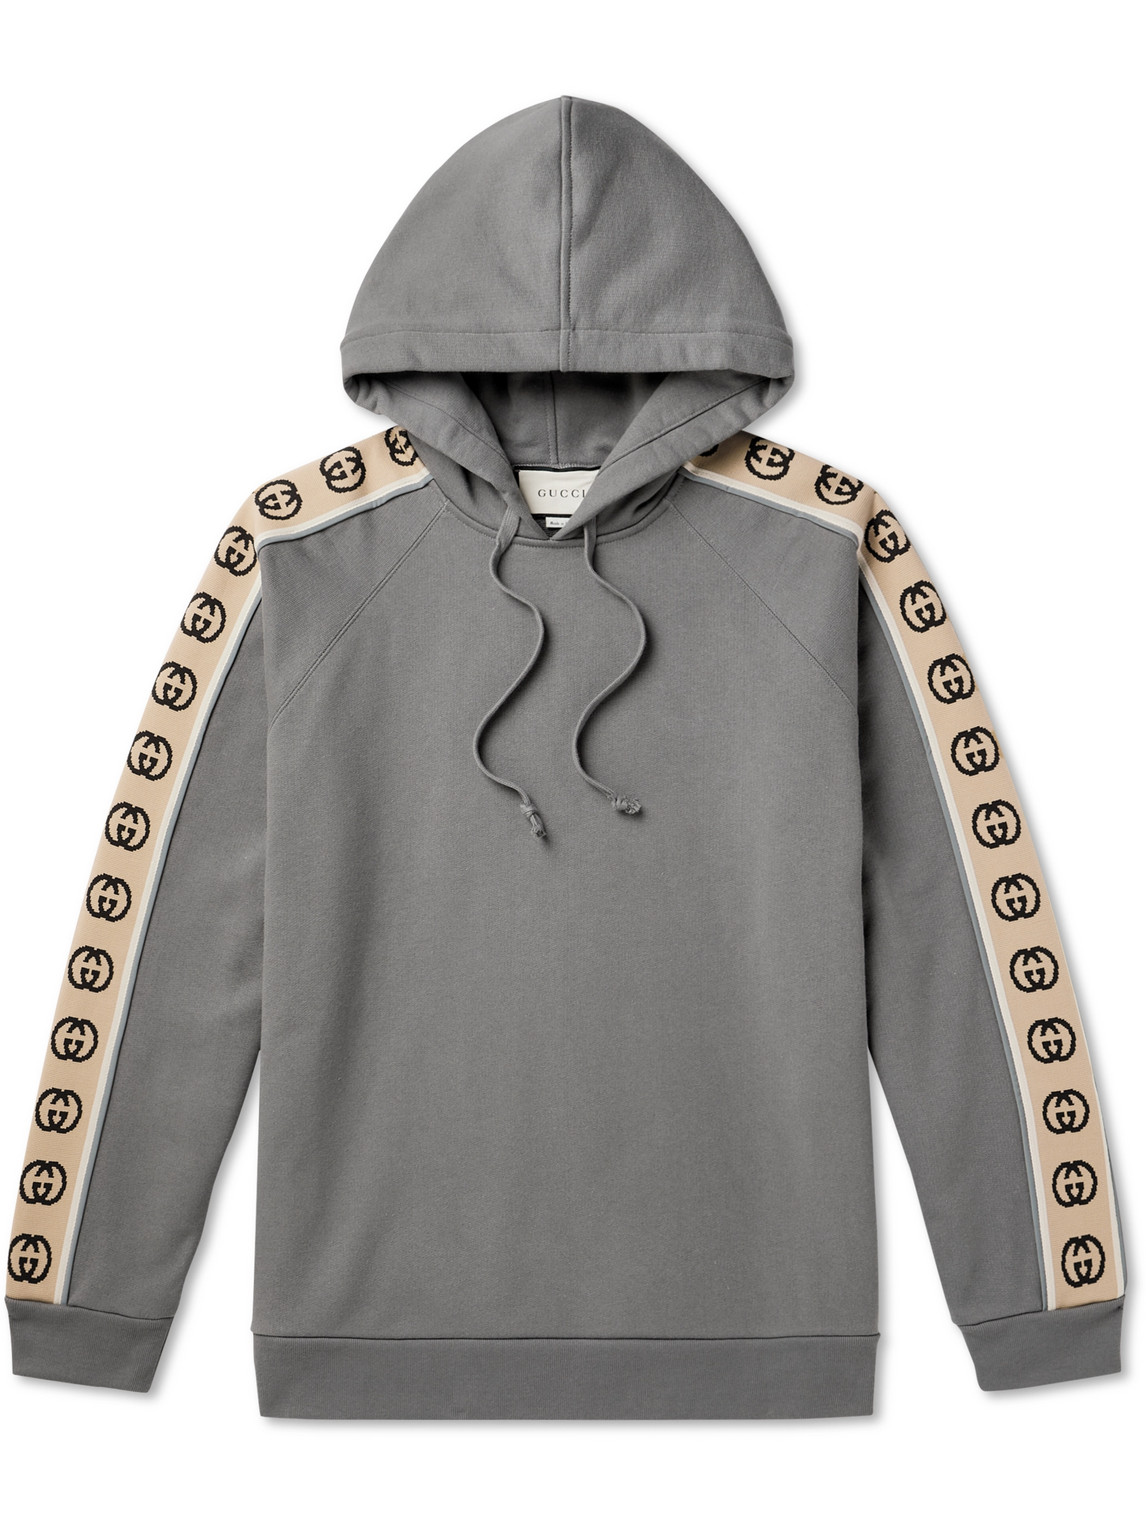 GUCCI - Oversized Webbing-Trimmed Loopback Cotton-Jersey Hoodie - Men - Gray - L